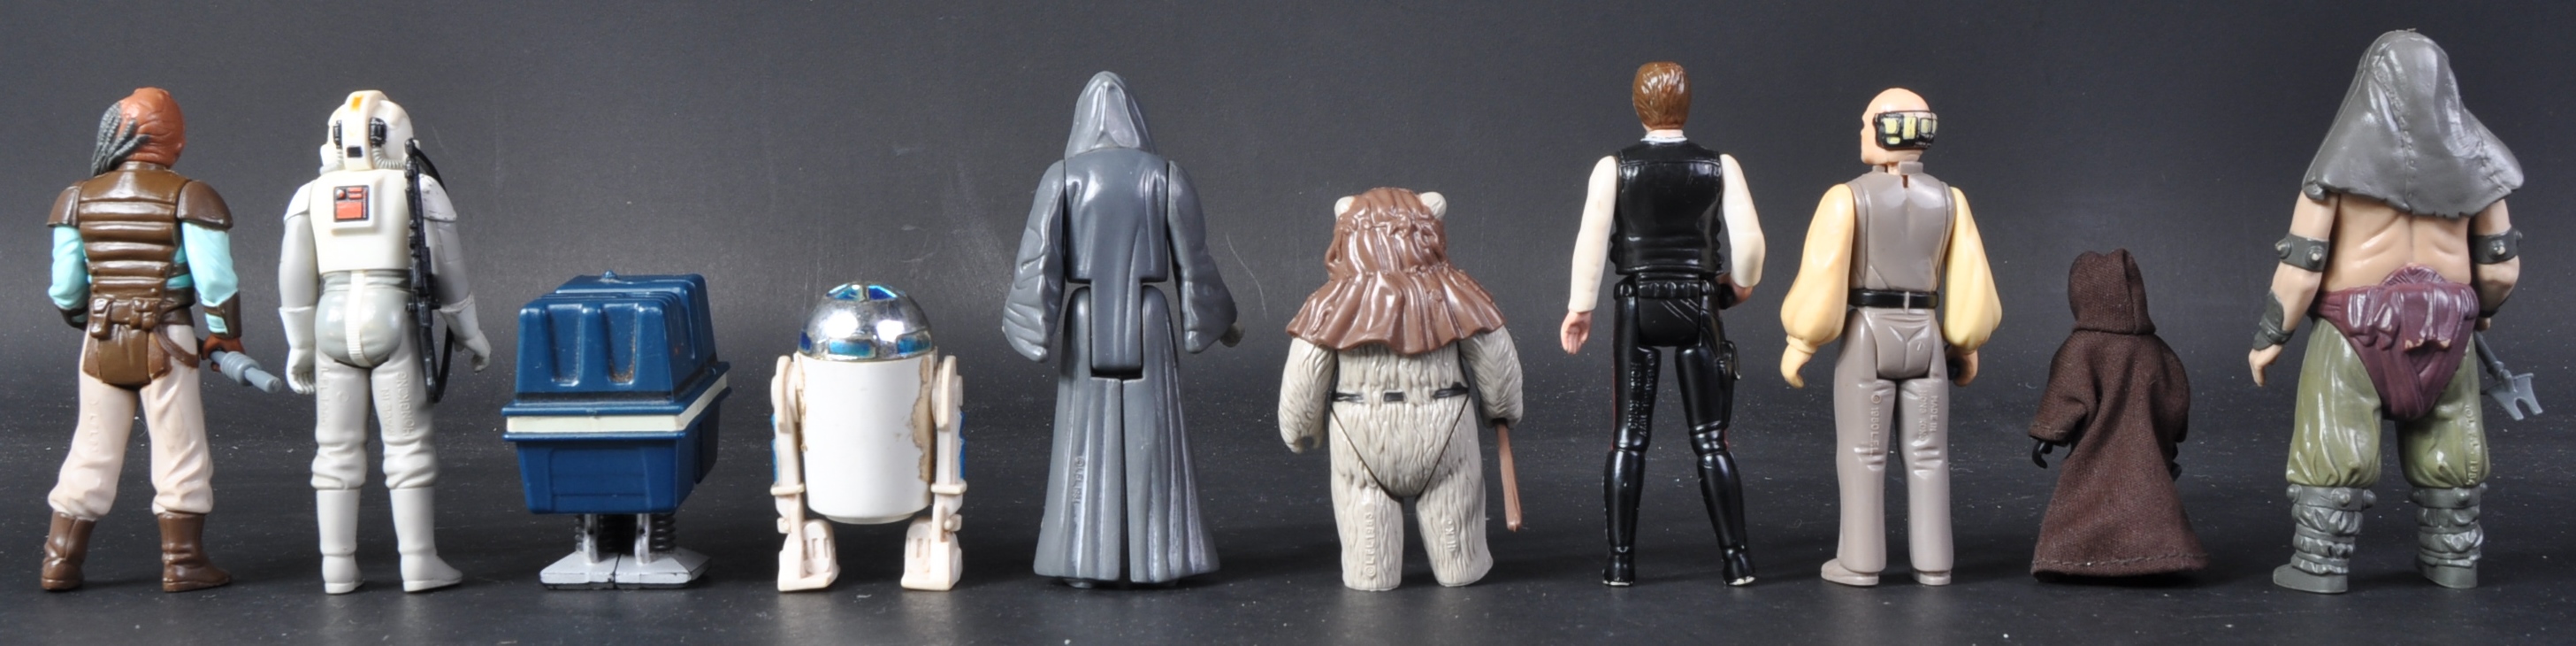 STAR WARS - COLLECTION OF VINTAGE ACTION FIGURES - Image 2 of 7